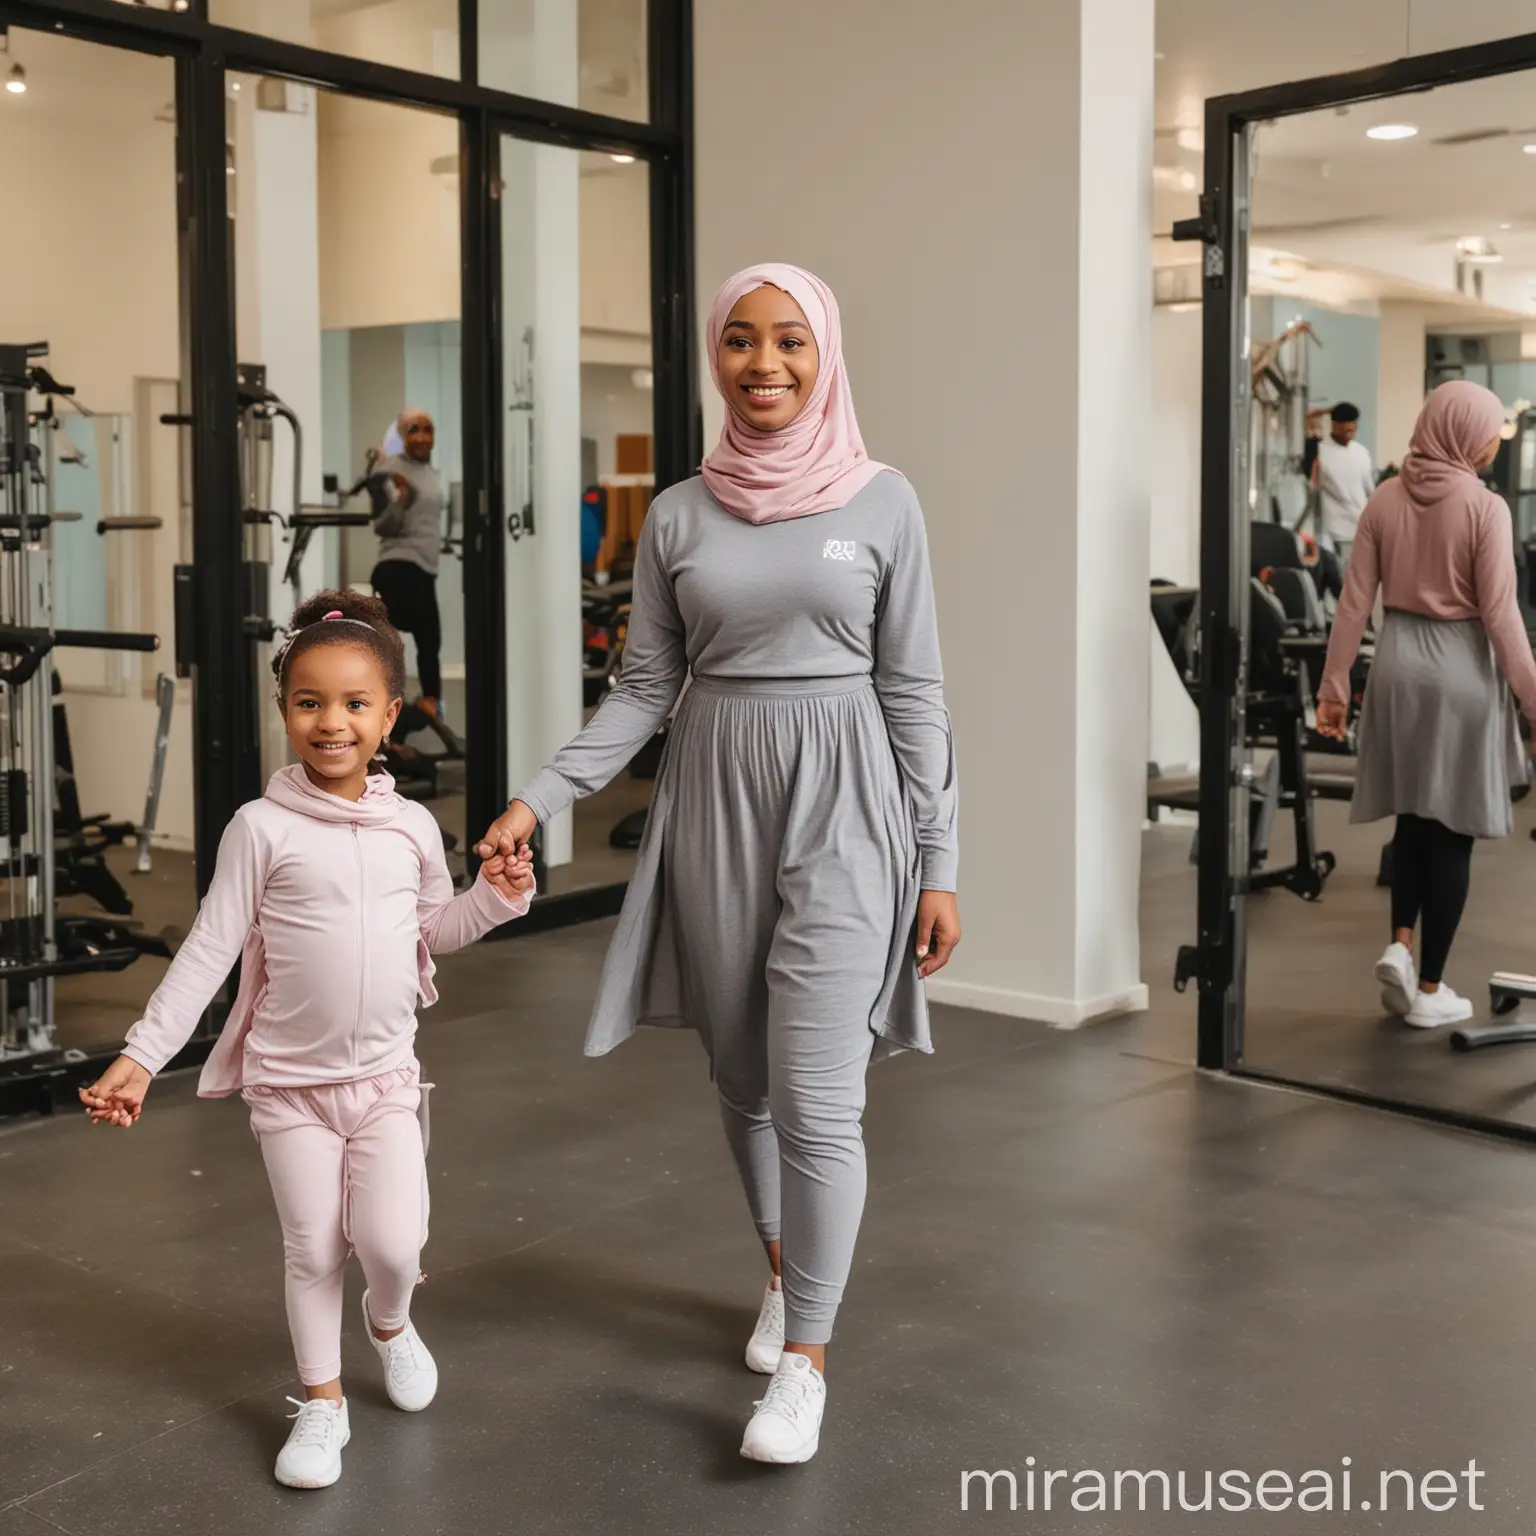 black woman, wearing hijab, wearing modest gym clothing, walking into the gym entrance, holding her toddler daughter's hand, they are both smiling, woman is wearing exercise clothing, in the background there are gym employees ready to greet her, the woman has ulnar longitudinal deficiency
